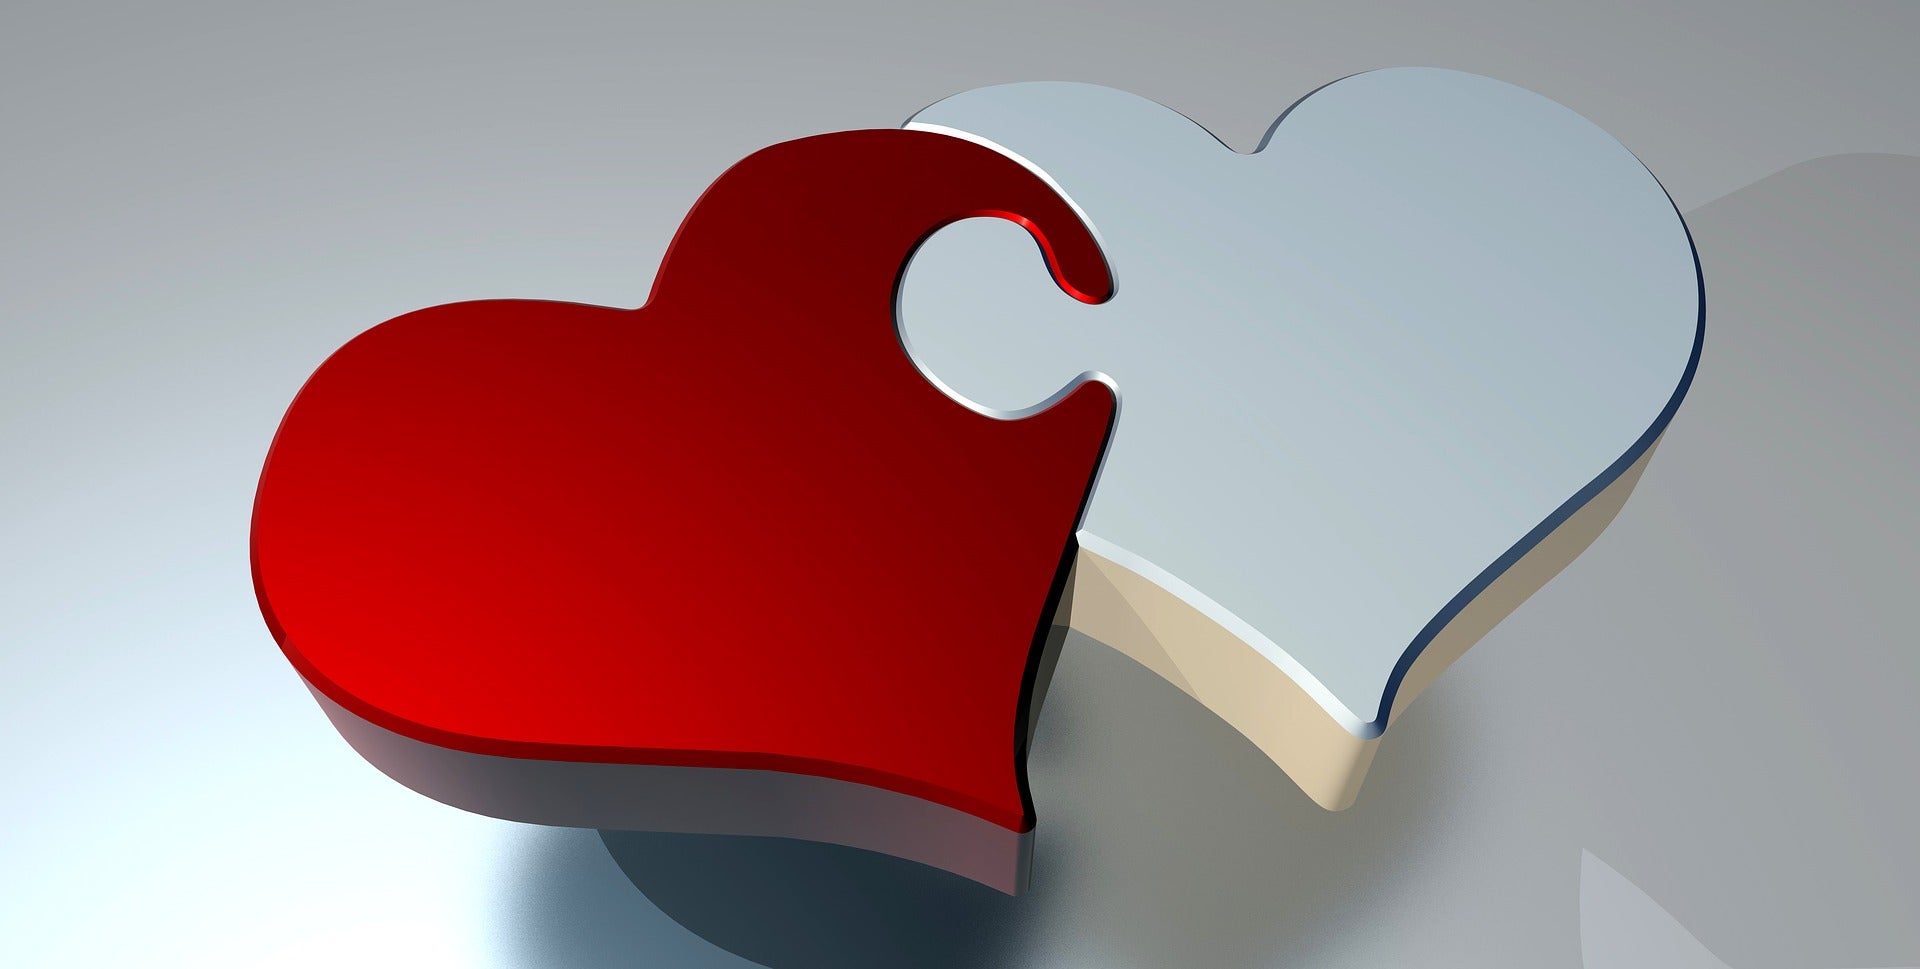 Interlocking red and white heart jigsaw pieces Image by PIRO from Pixabay 